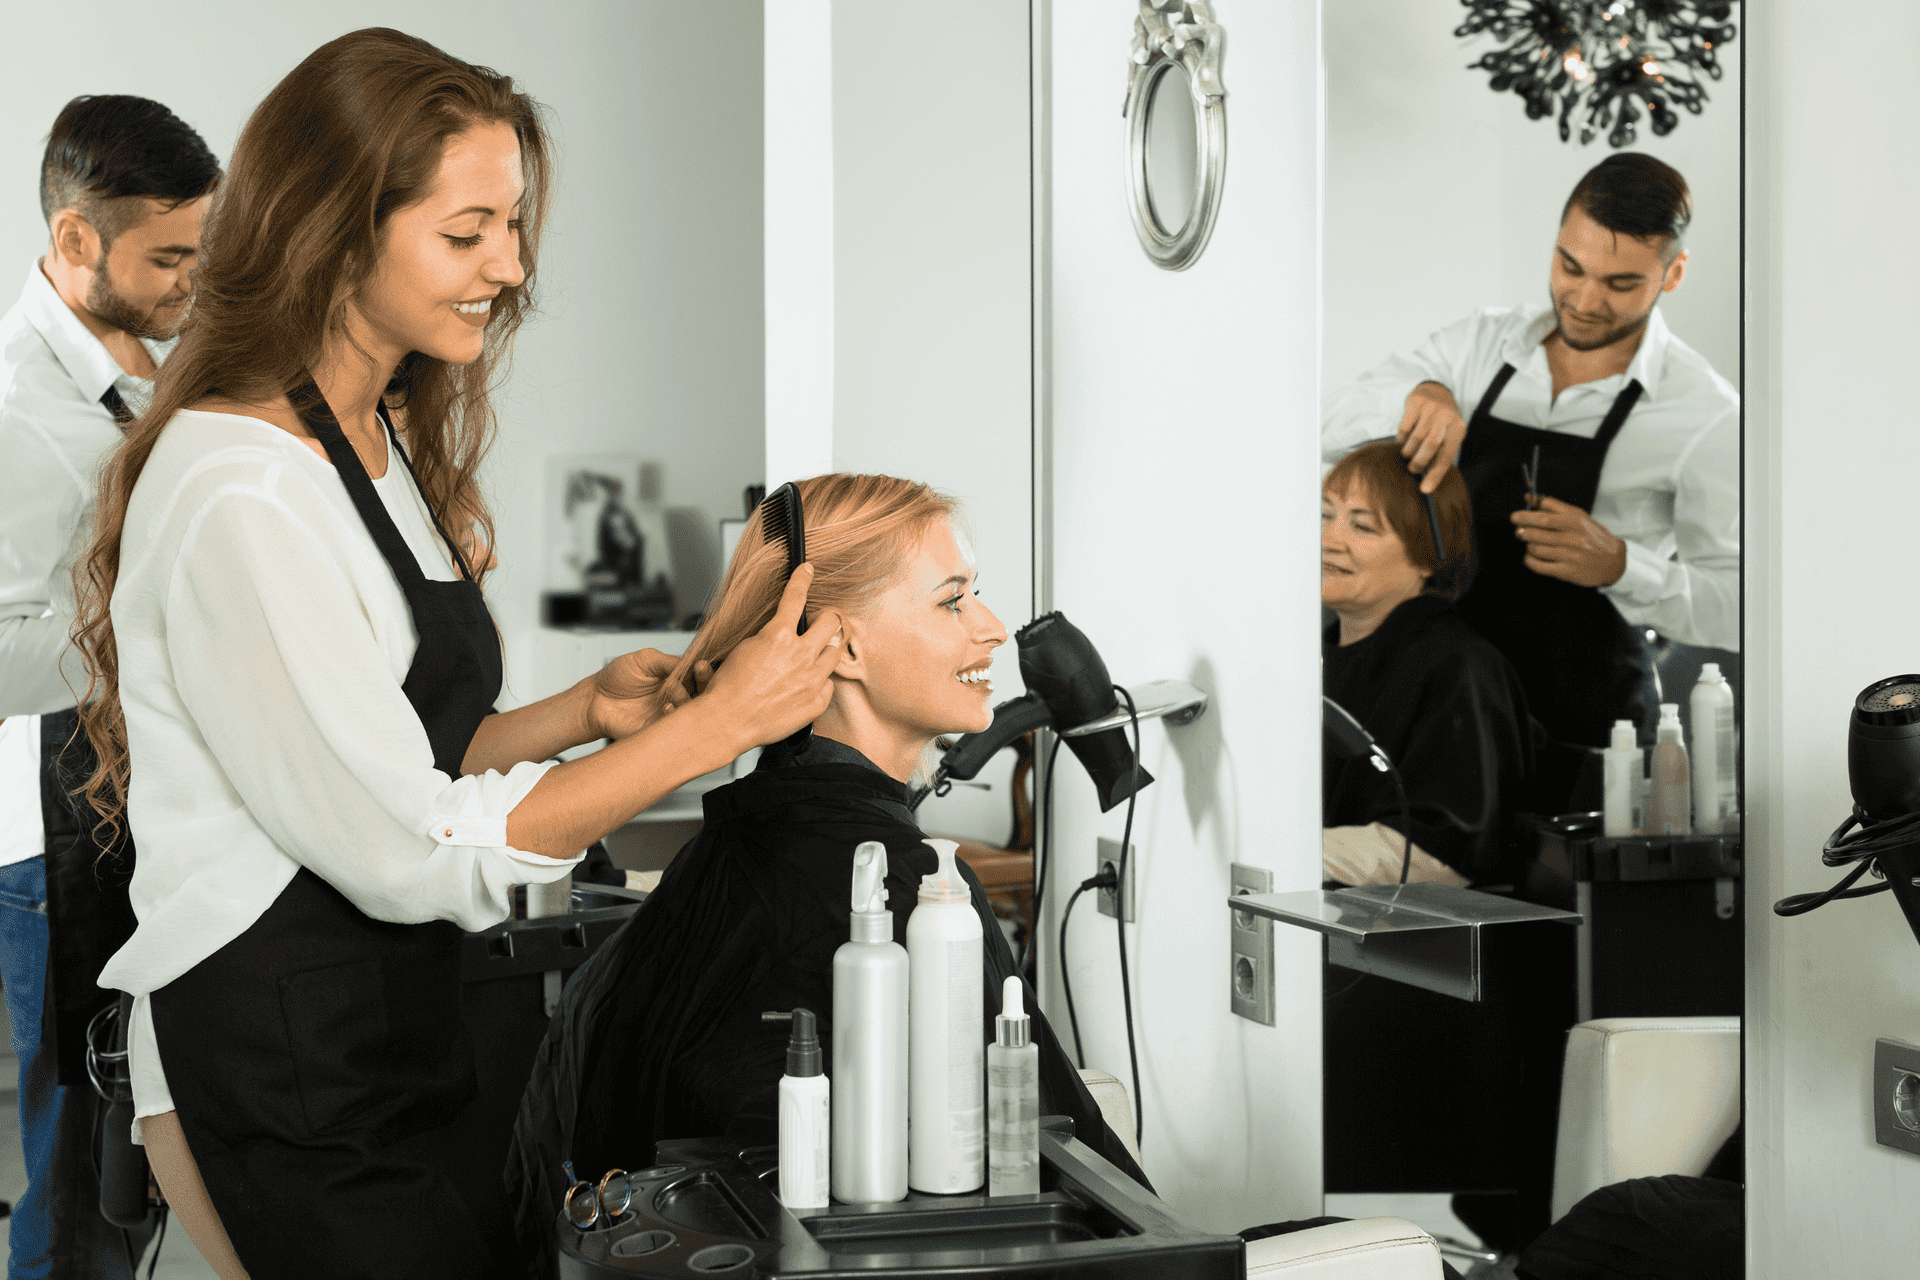 Hairdresser working on a client's haircut in a salon.